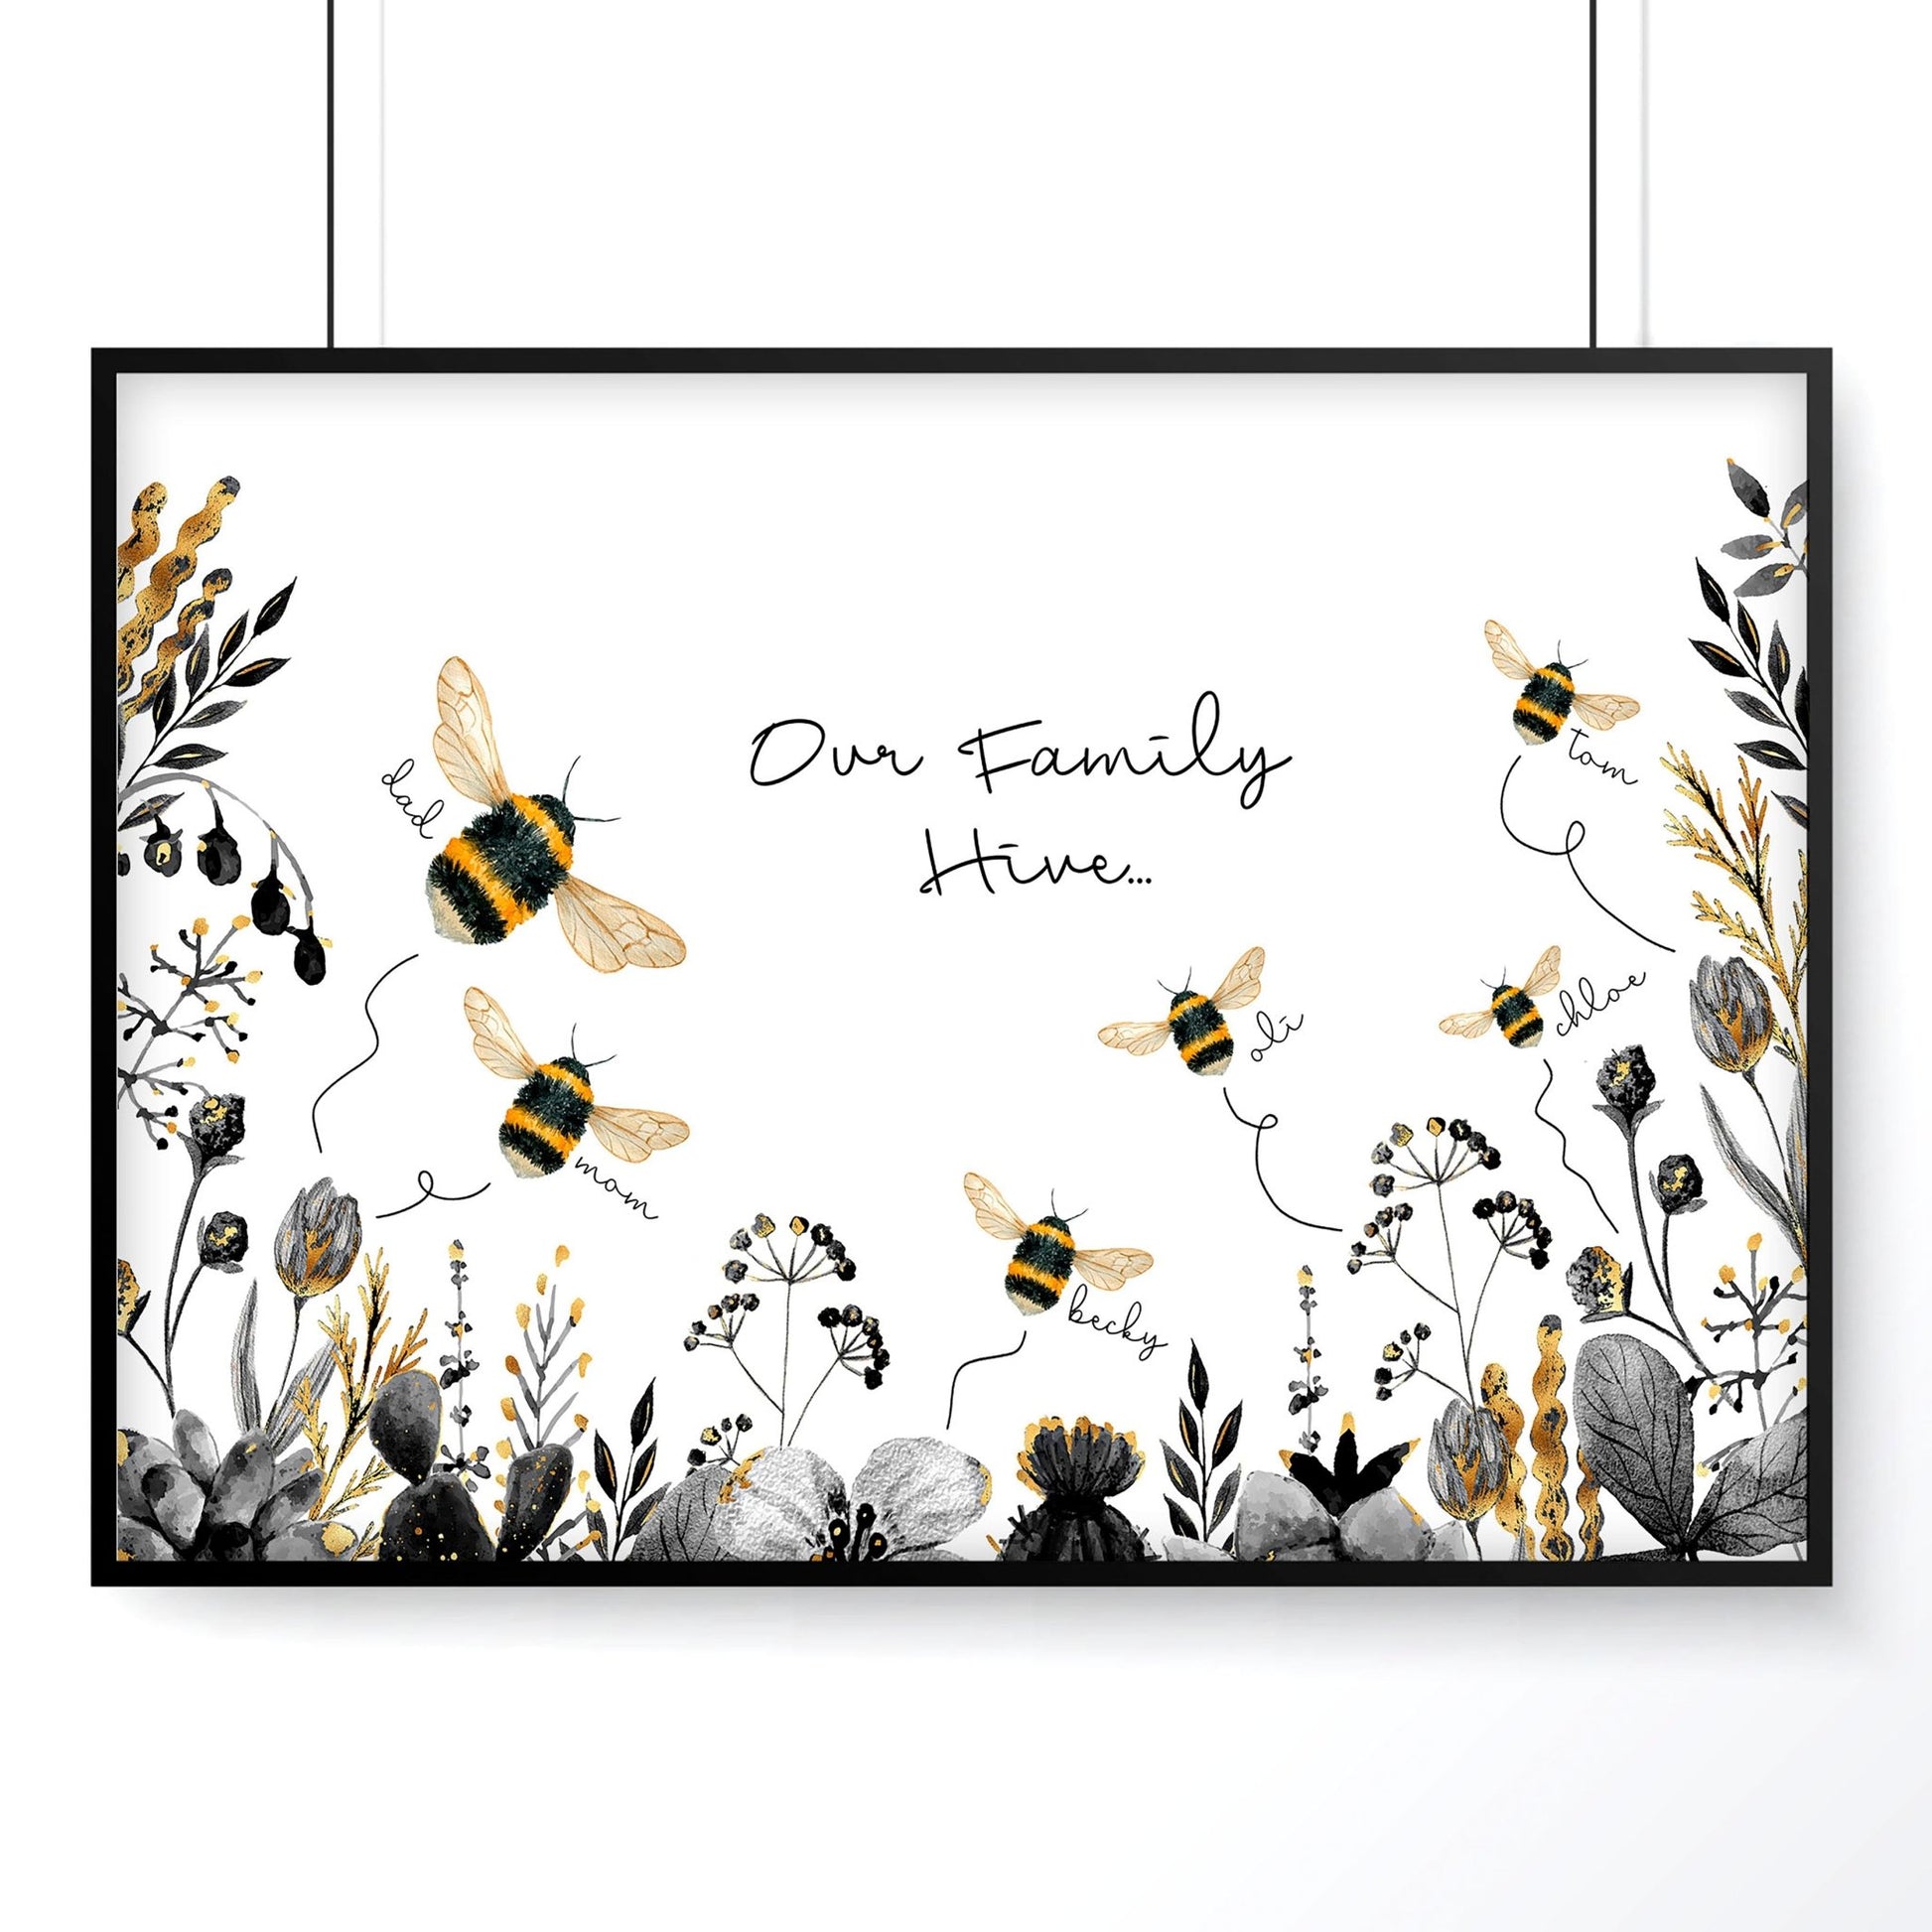 Personalized gifts for family | wall art - About Wall Art